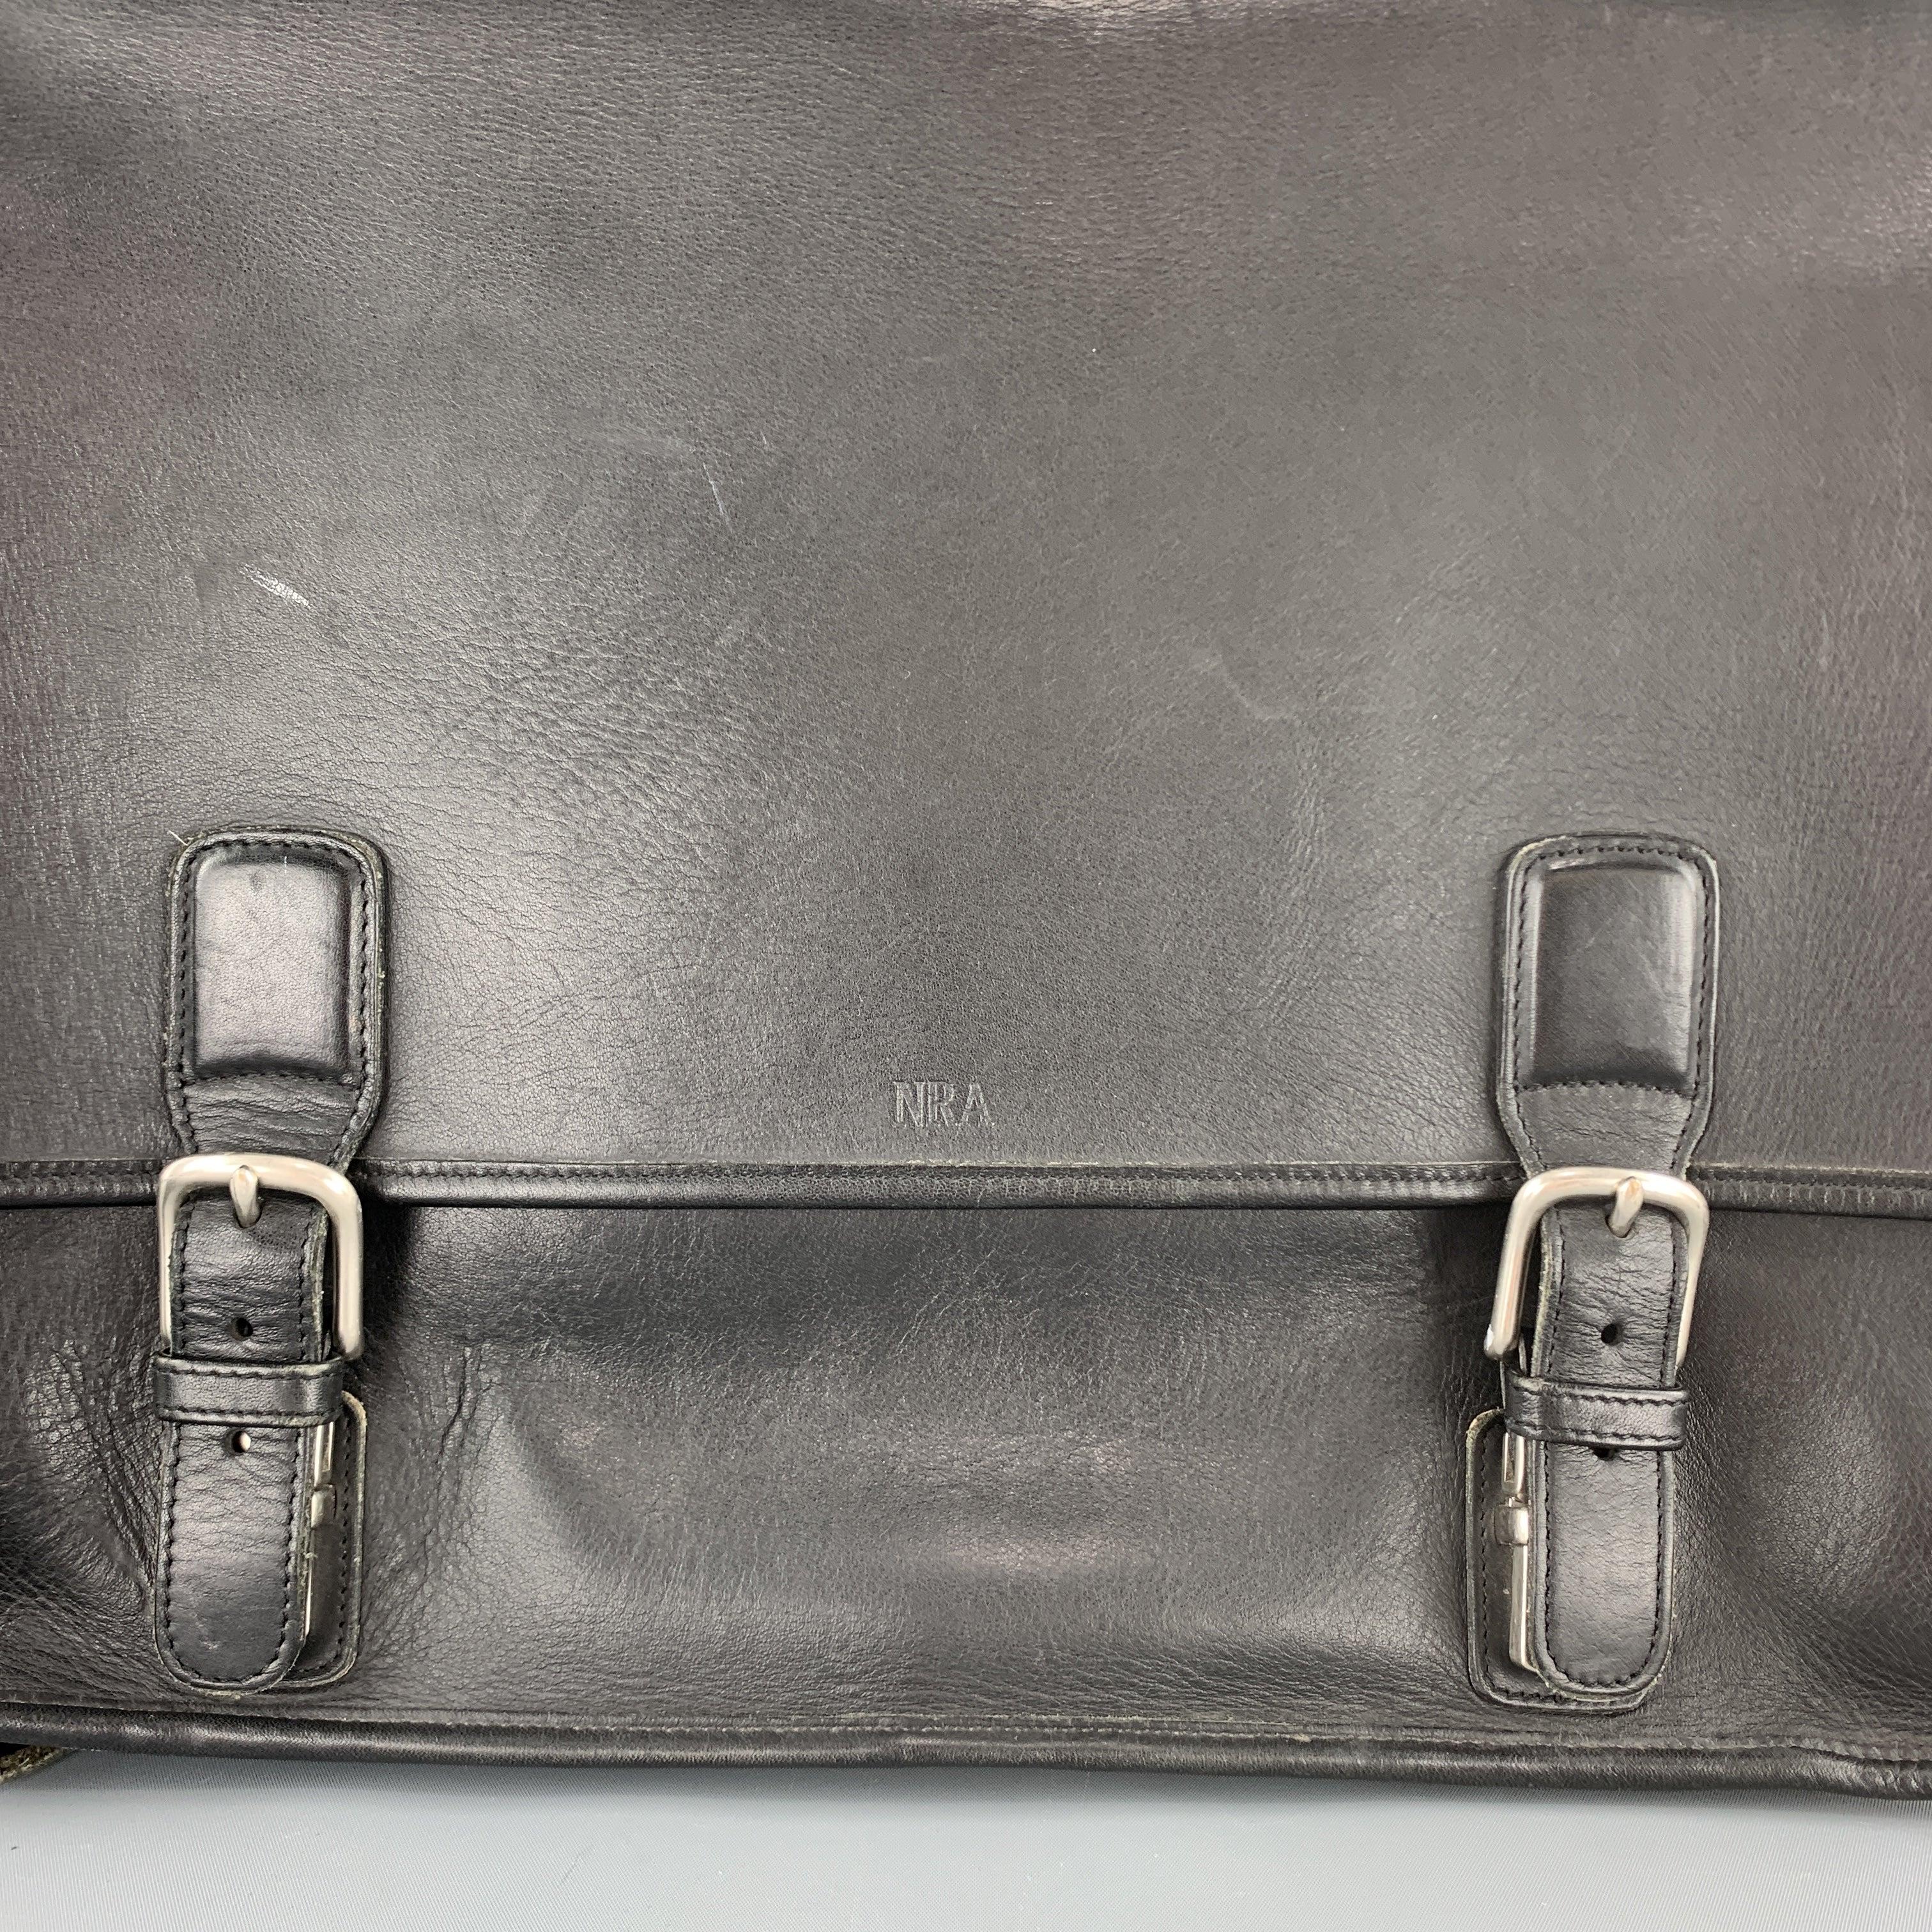 COACH briefcase comes in black leather with a top flap, double faux buckle press snap closures, internal zip compartments with detachable laptop padding, and crossbody strap. 